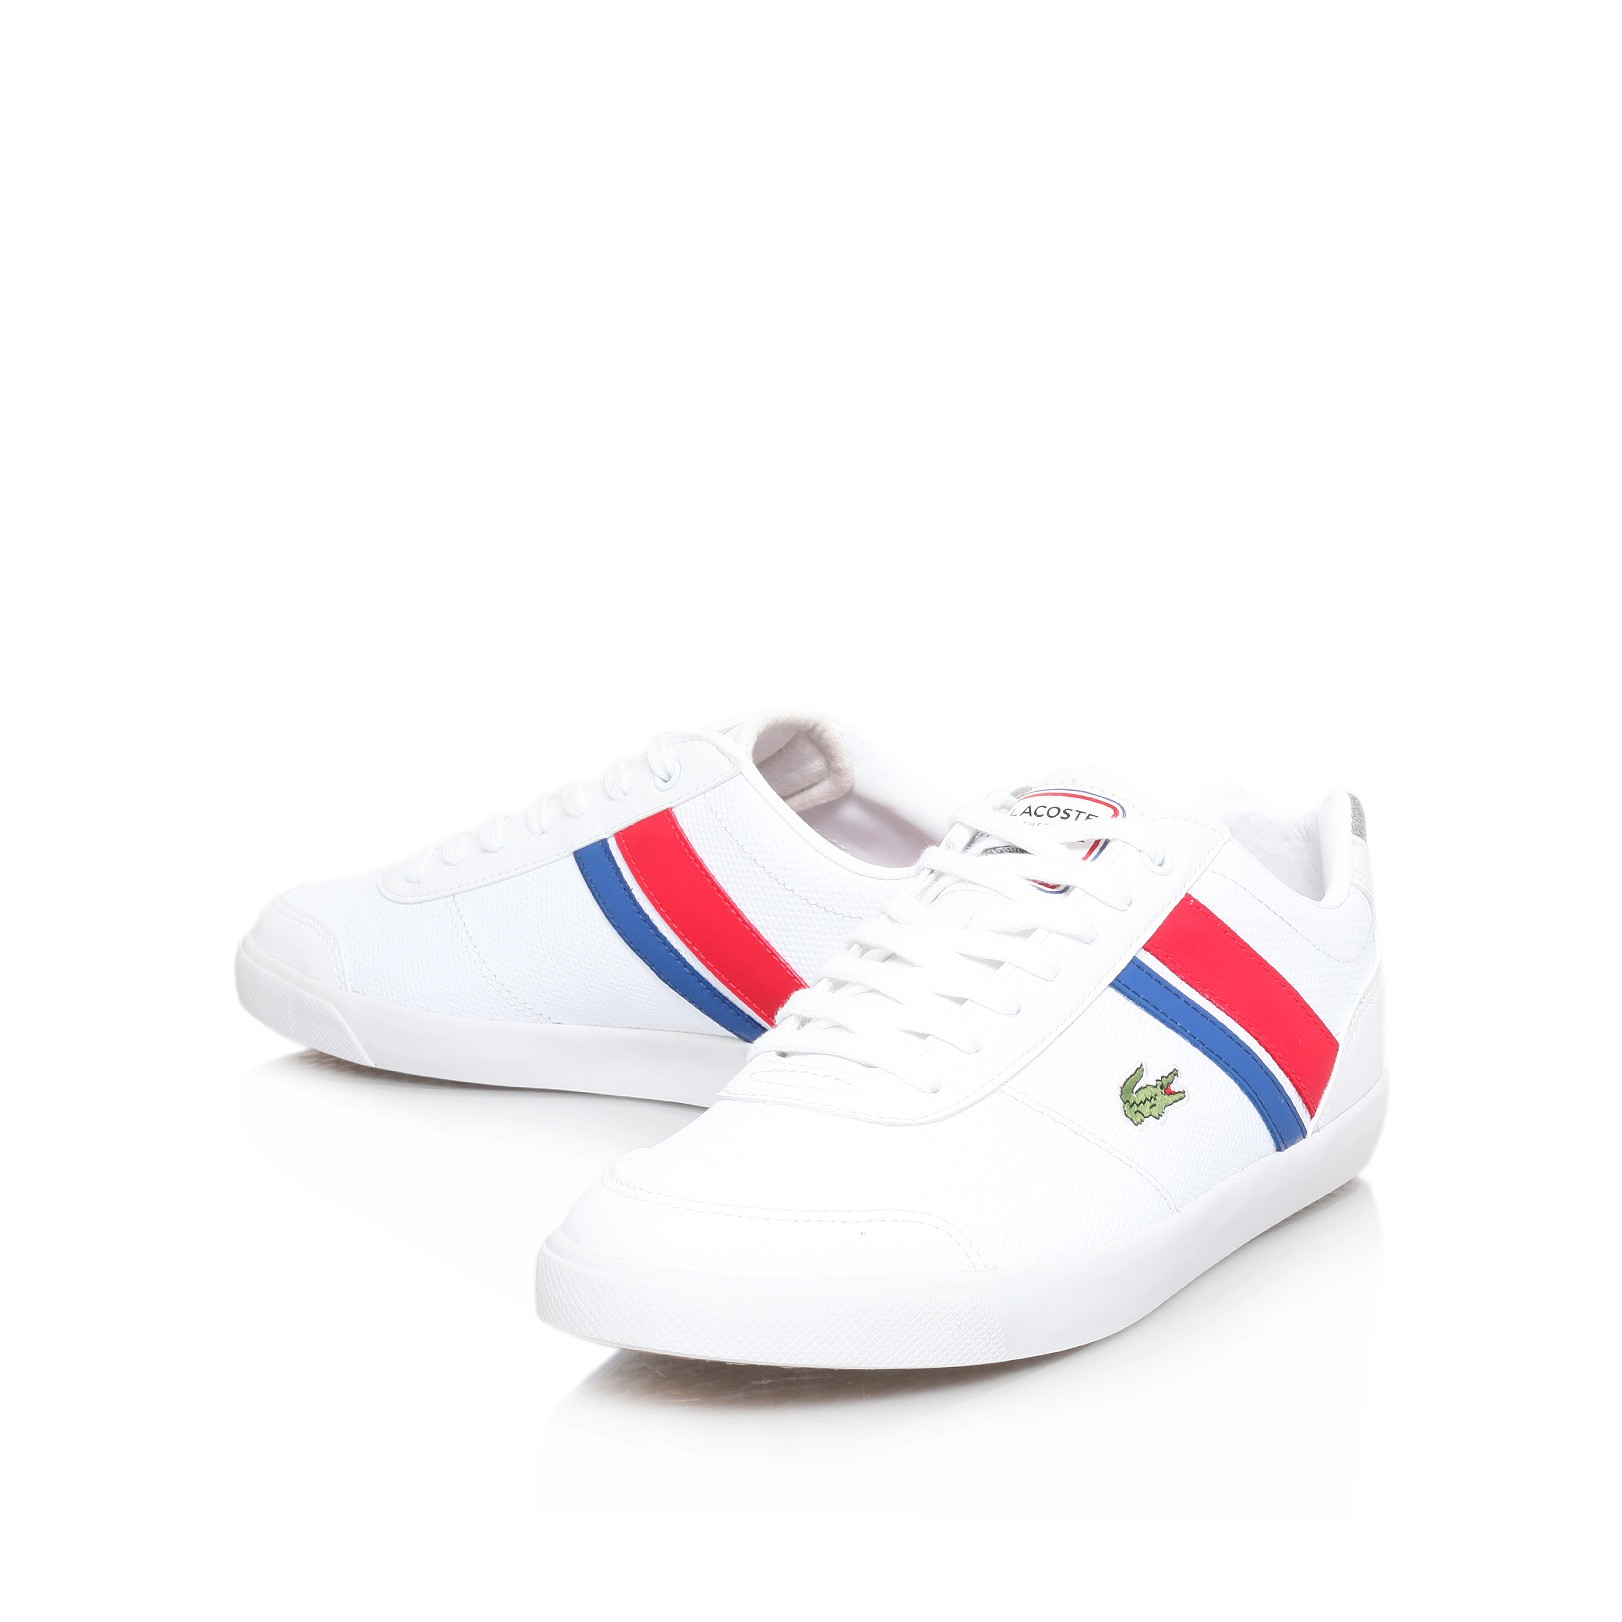 white shoes with blue and red stripes